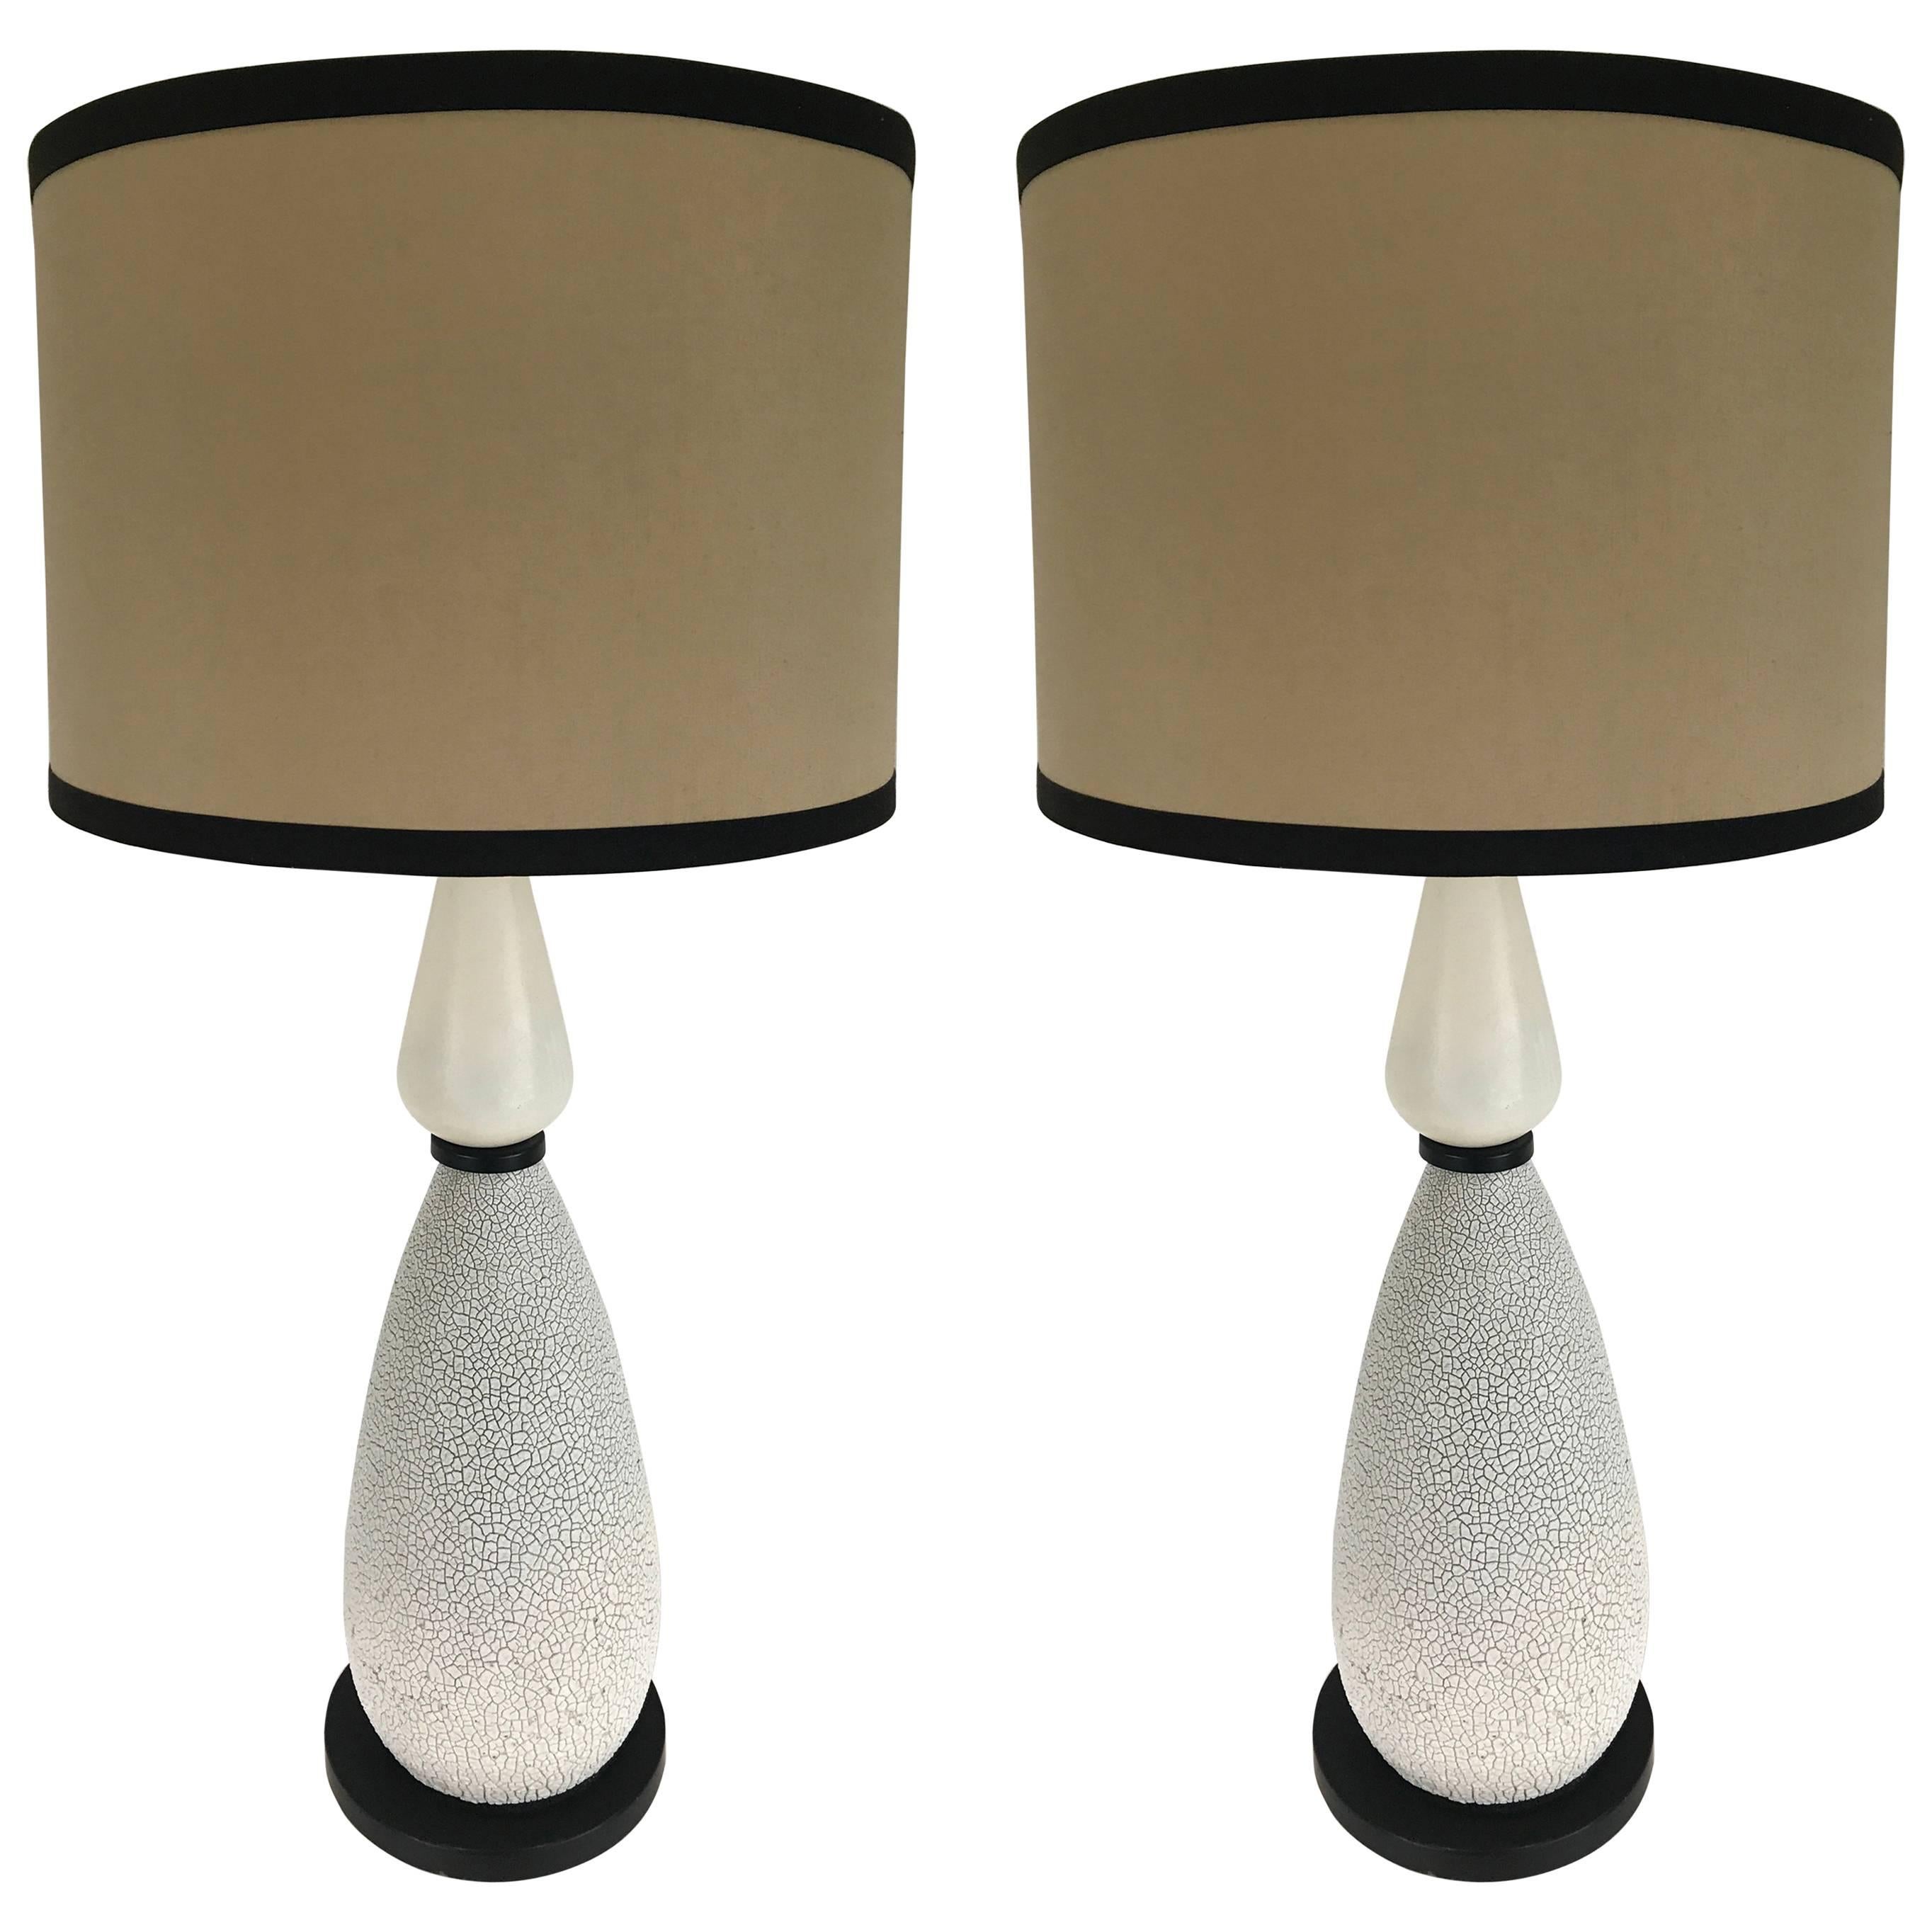 A pair of tall midcentury table lamps. Consisting of two gourd shaped spheres, one crackled and the other smooth. Shown with original tall shade and smaller drum shade. Both for display purposes only.